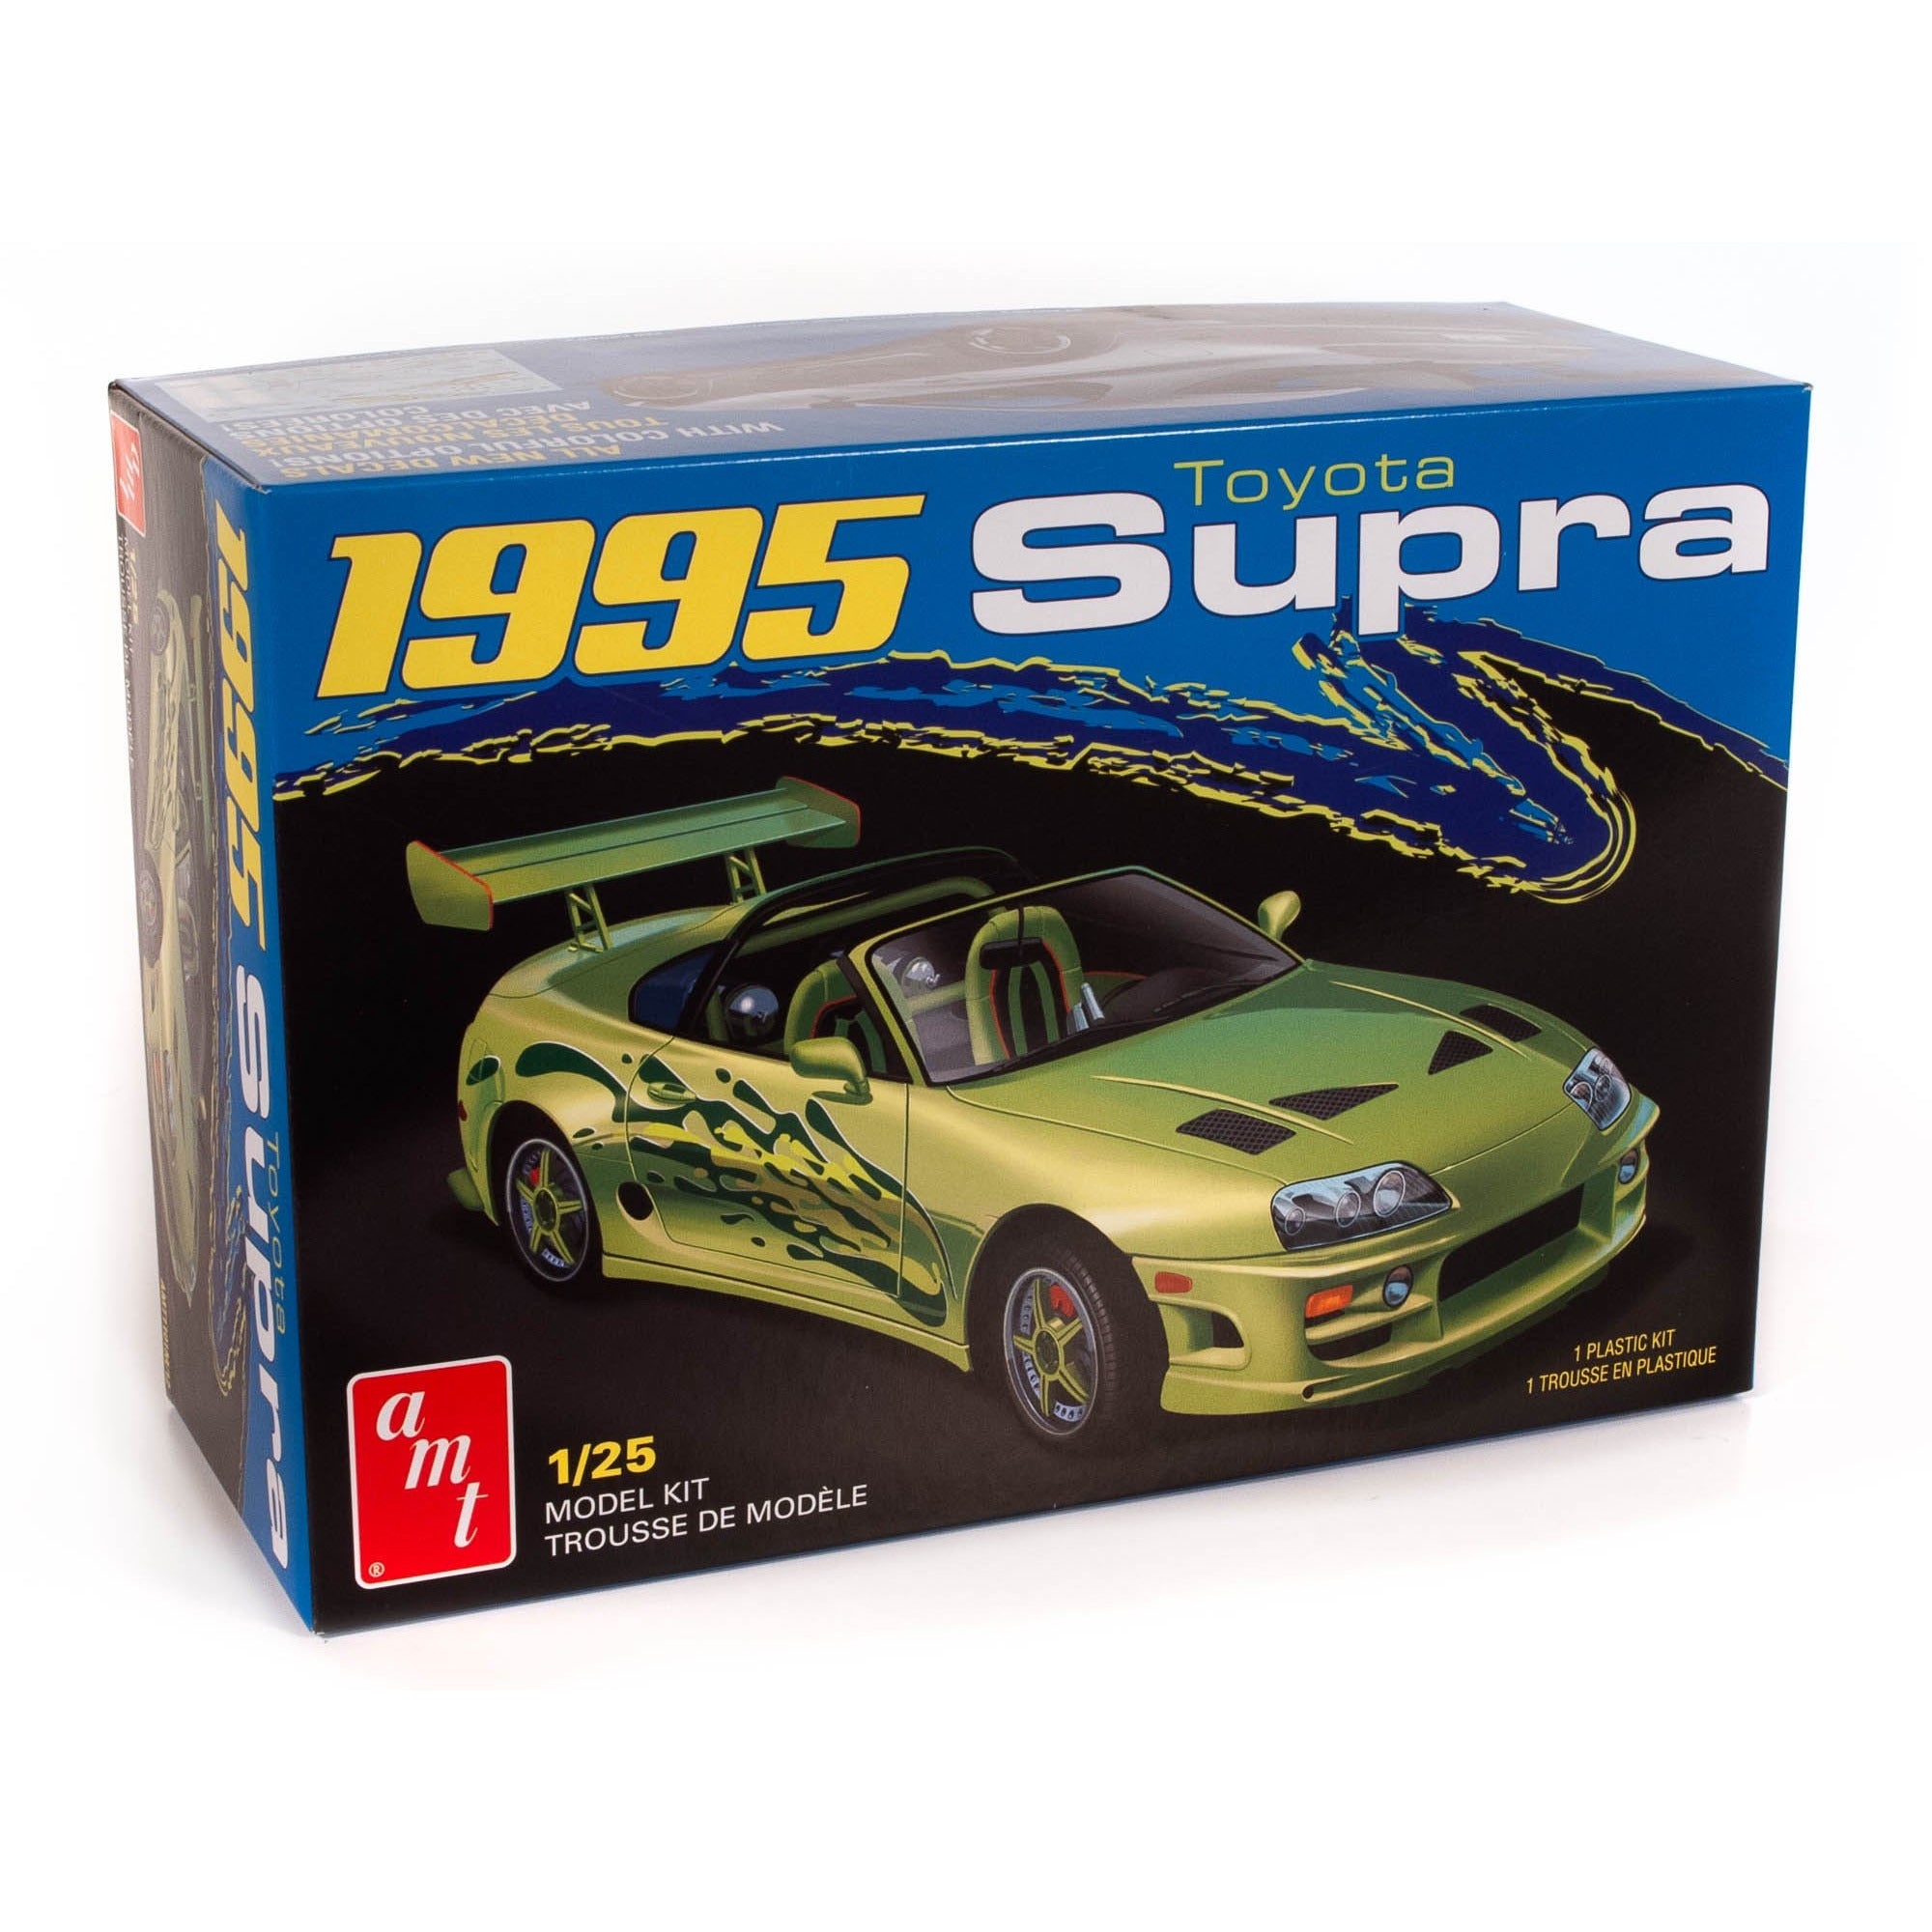 1995 Toyota Supra 1/25 Model Car Kit #1101 by AMT